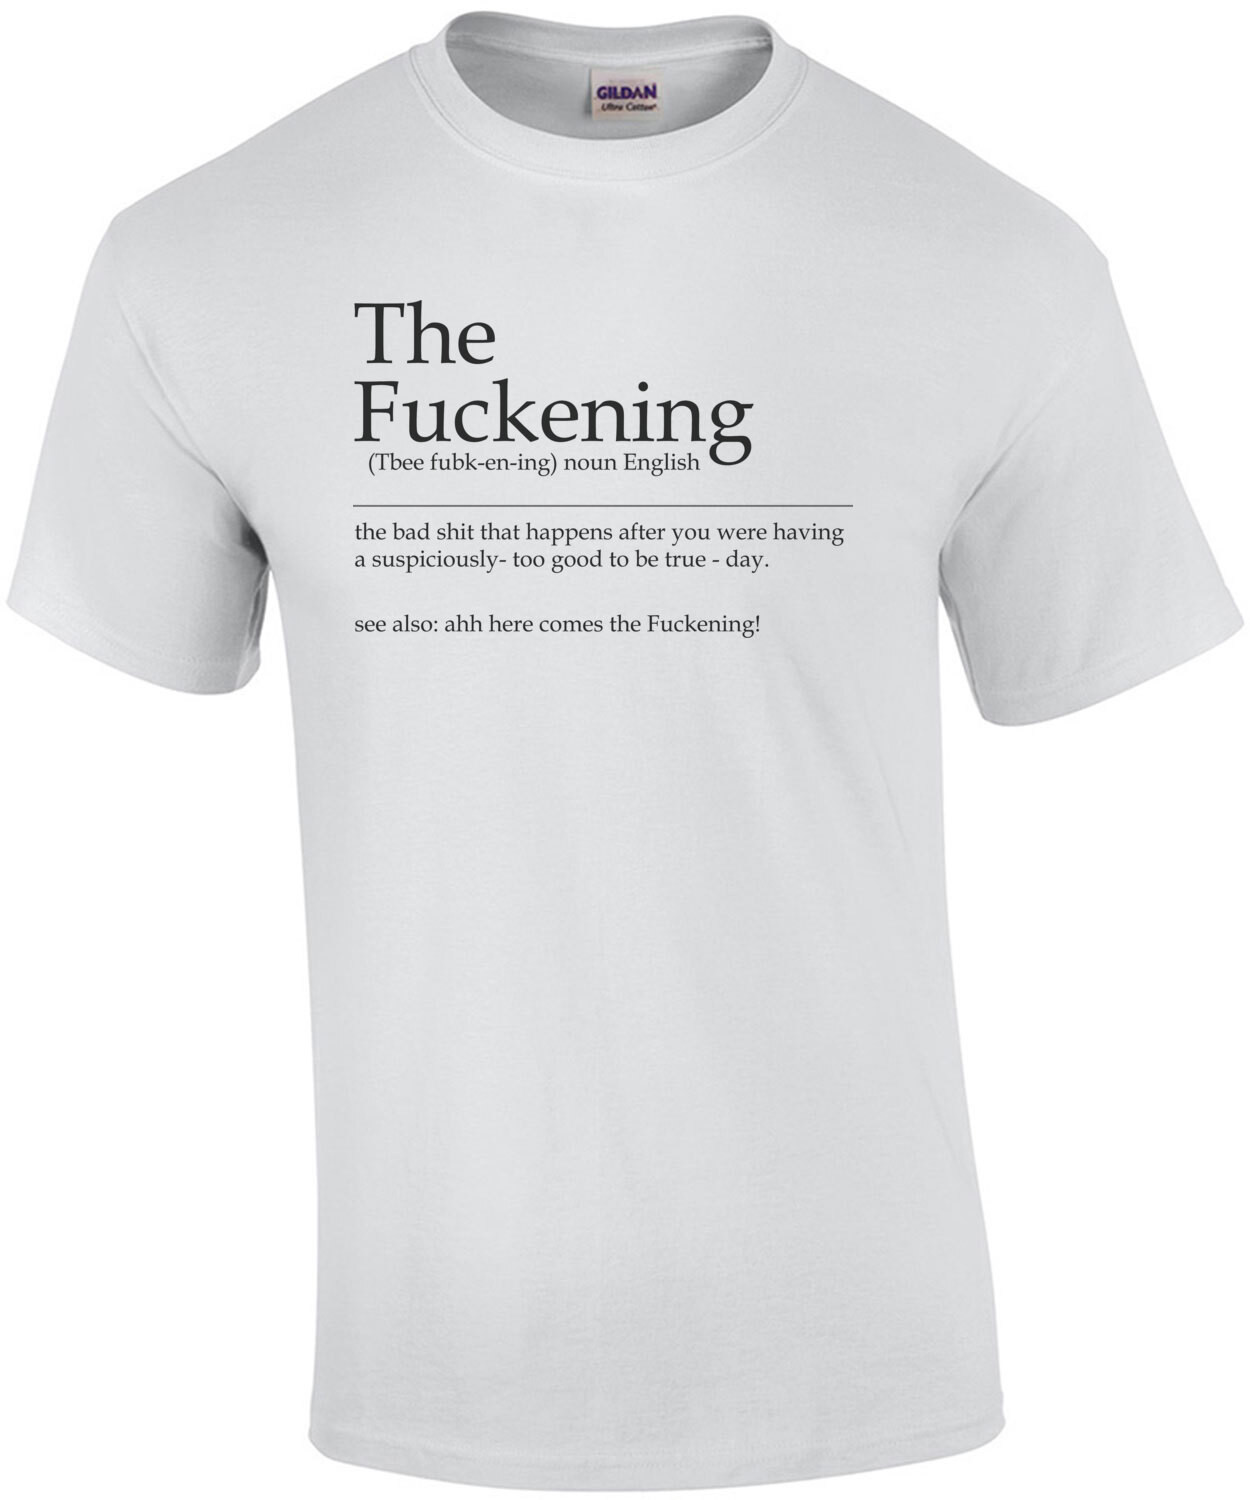 The Fuckening - the bad shit that happens after you were having a too good to be true day. Funny T-Shirt